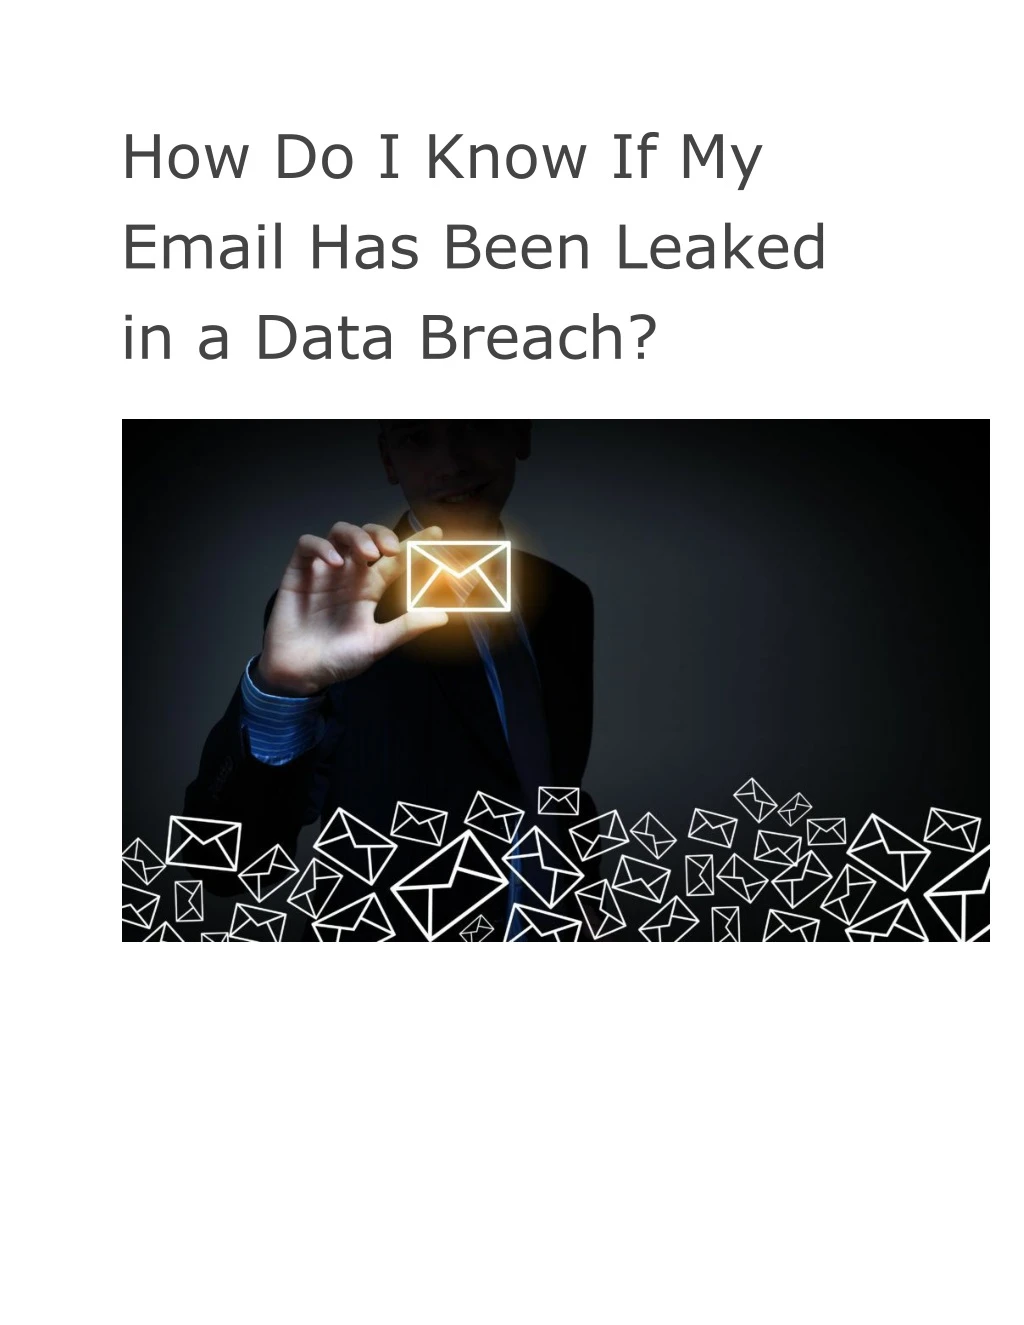 how do i know if my email has been leaked